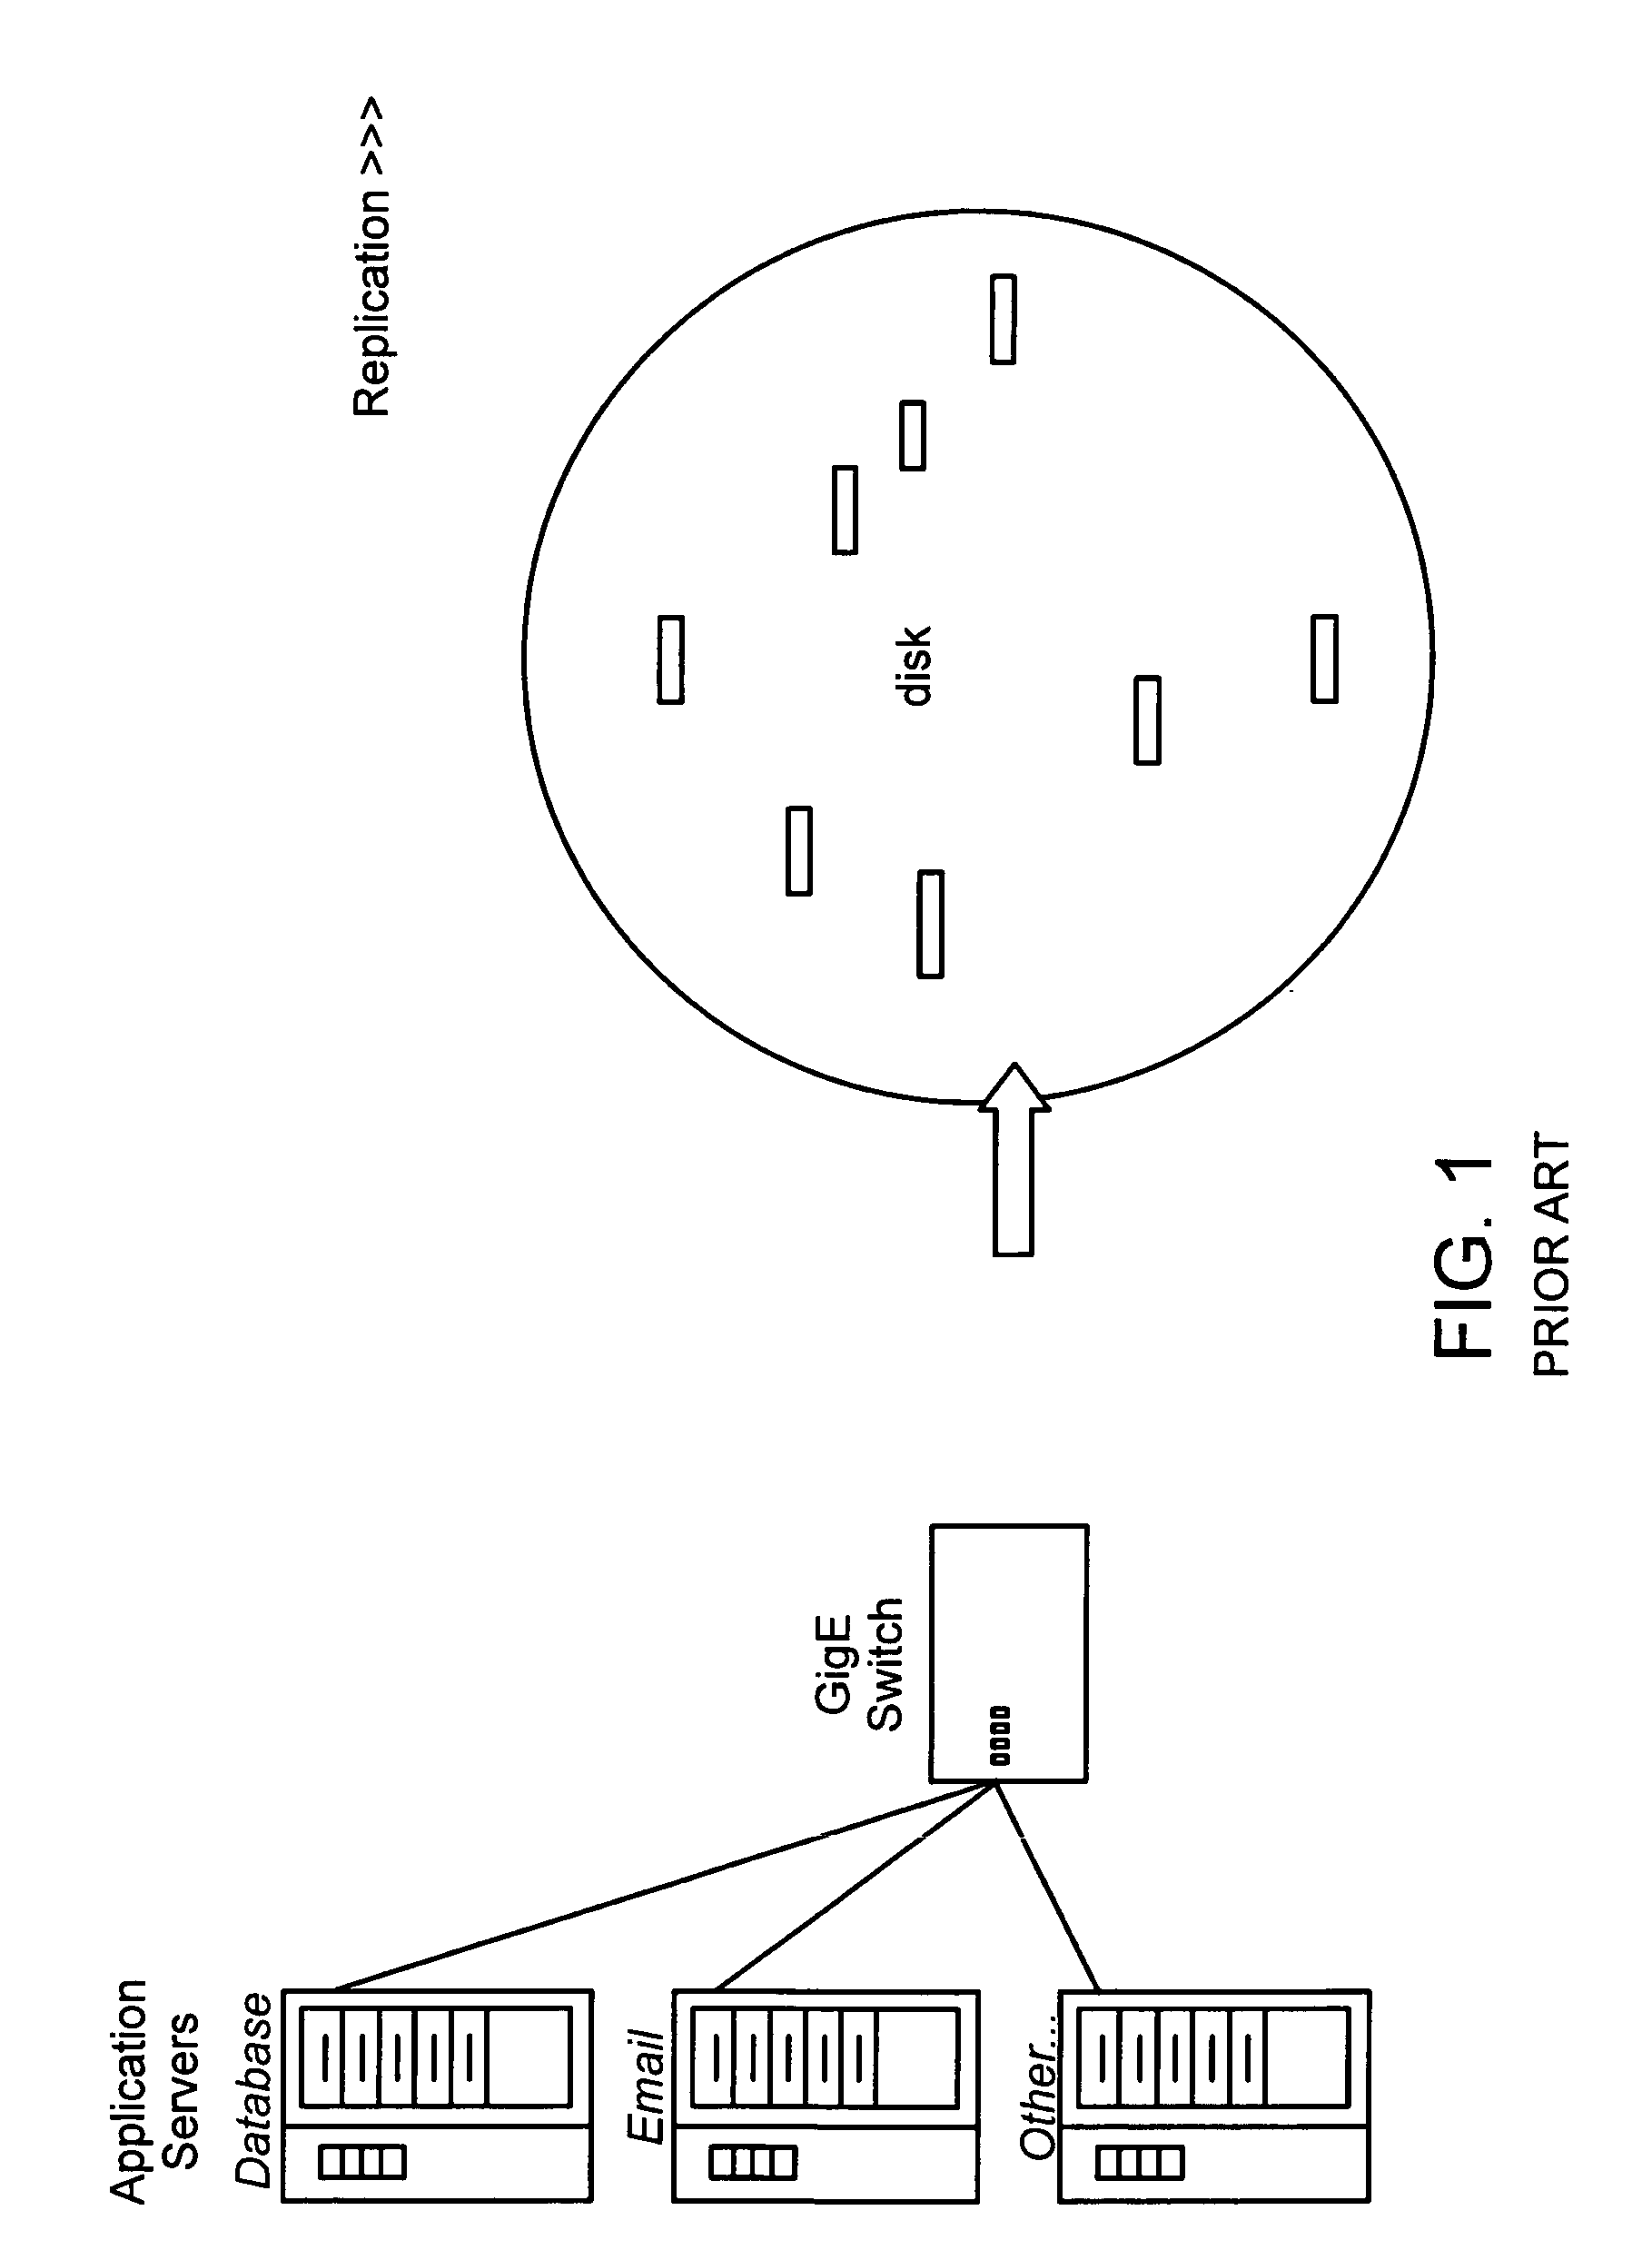 Adaptive cache engine for storage area network including systems and methods related thereto